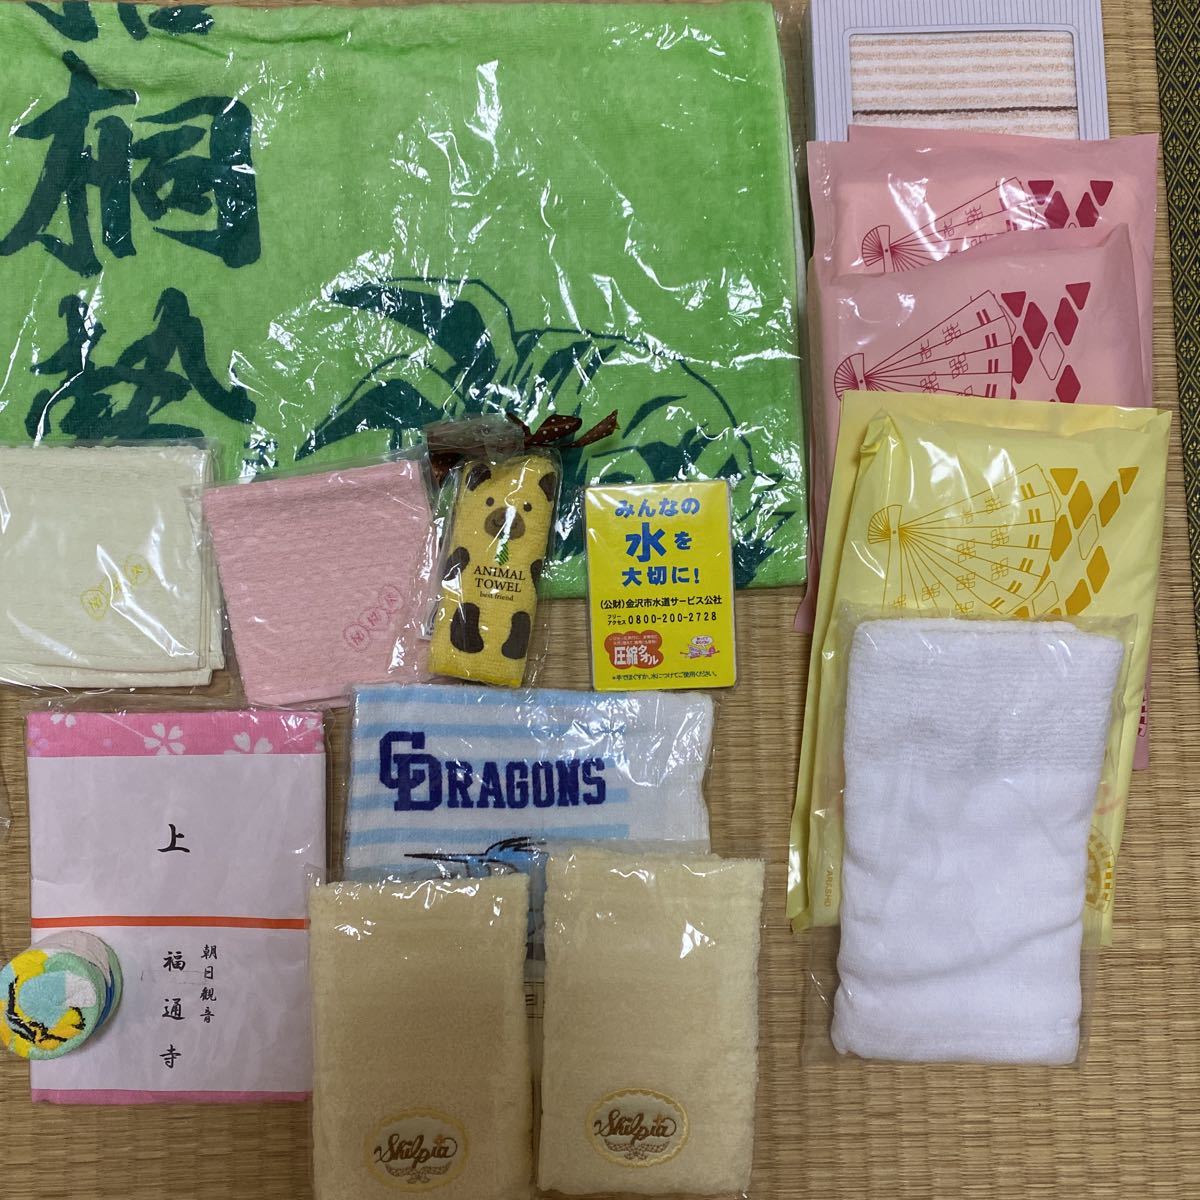  face towel hand towel bath towel little gift towel together 20 sheets together large amount character new goods 